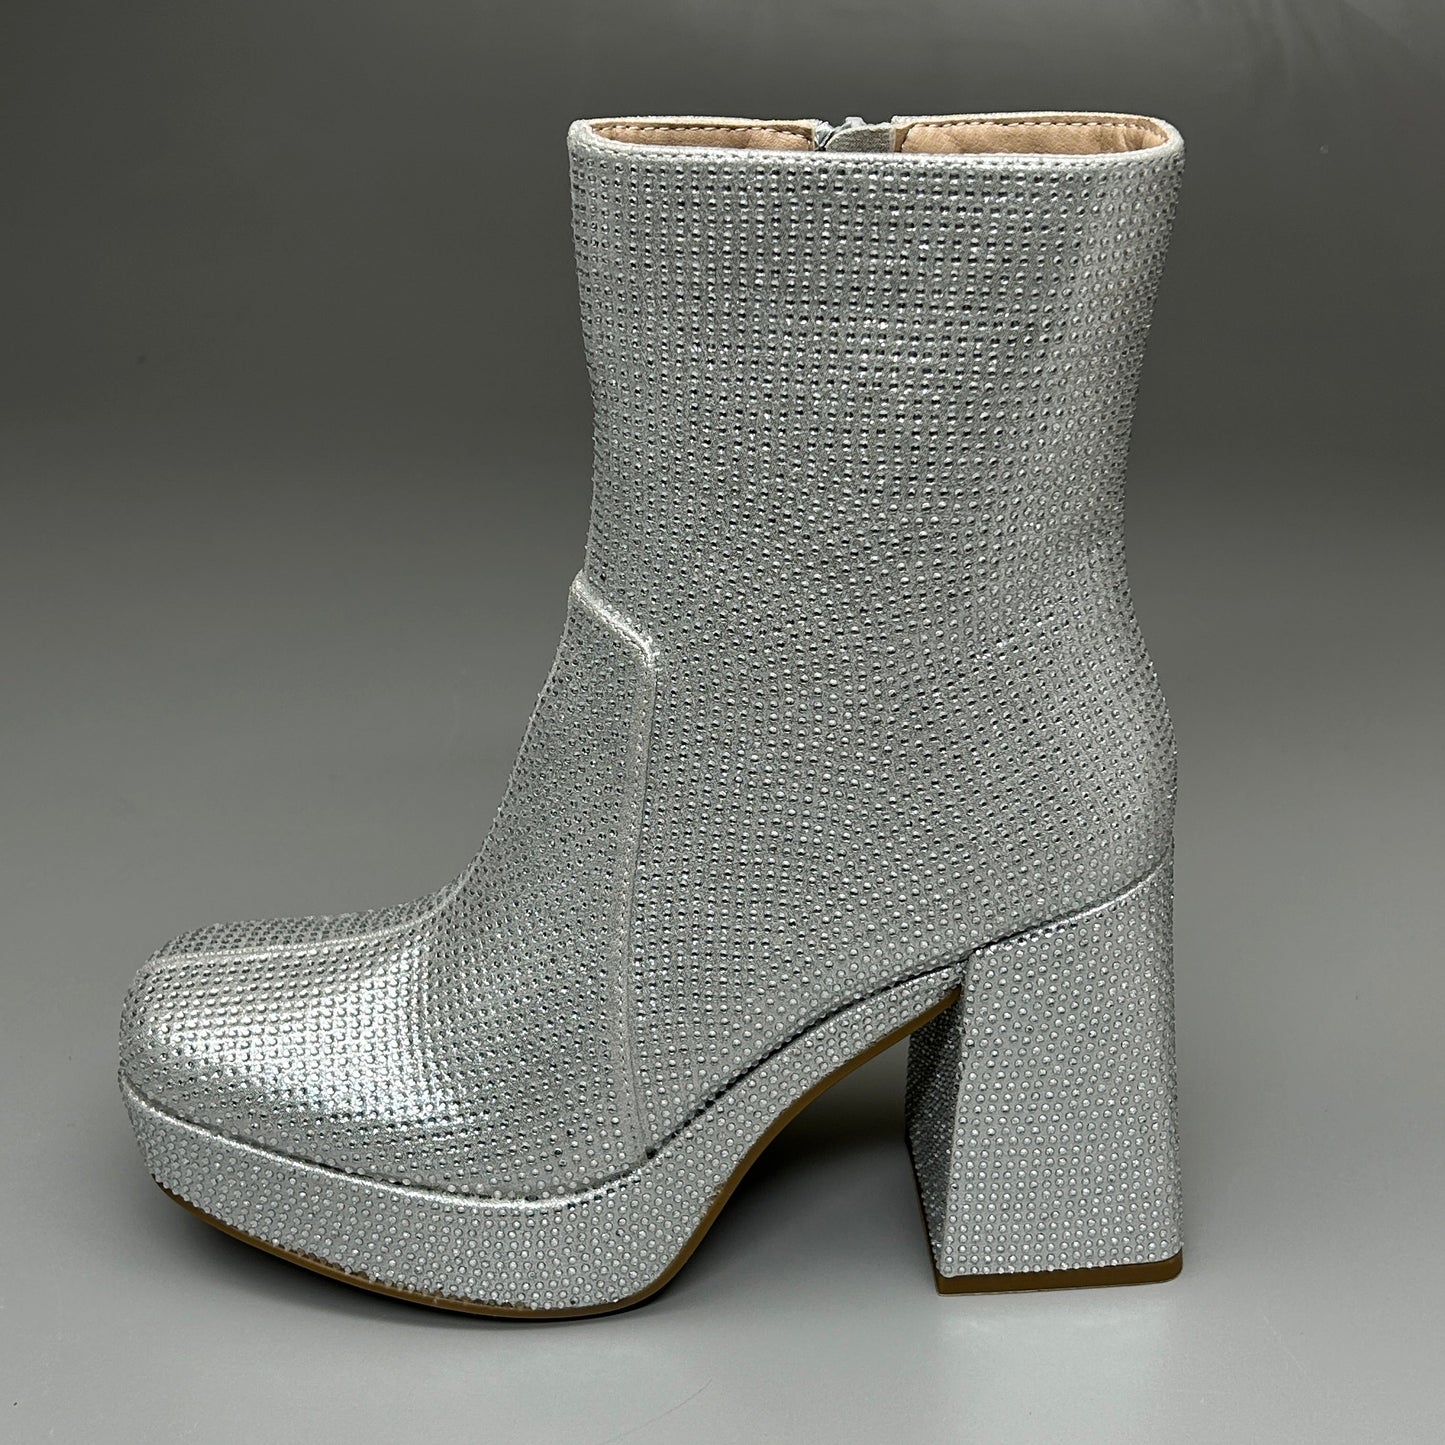 MIA Iva Silver Stone Heeled Boots Women's Sz 8 Silver GS1253108 (New)